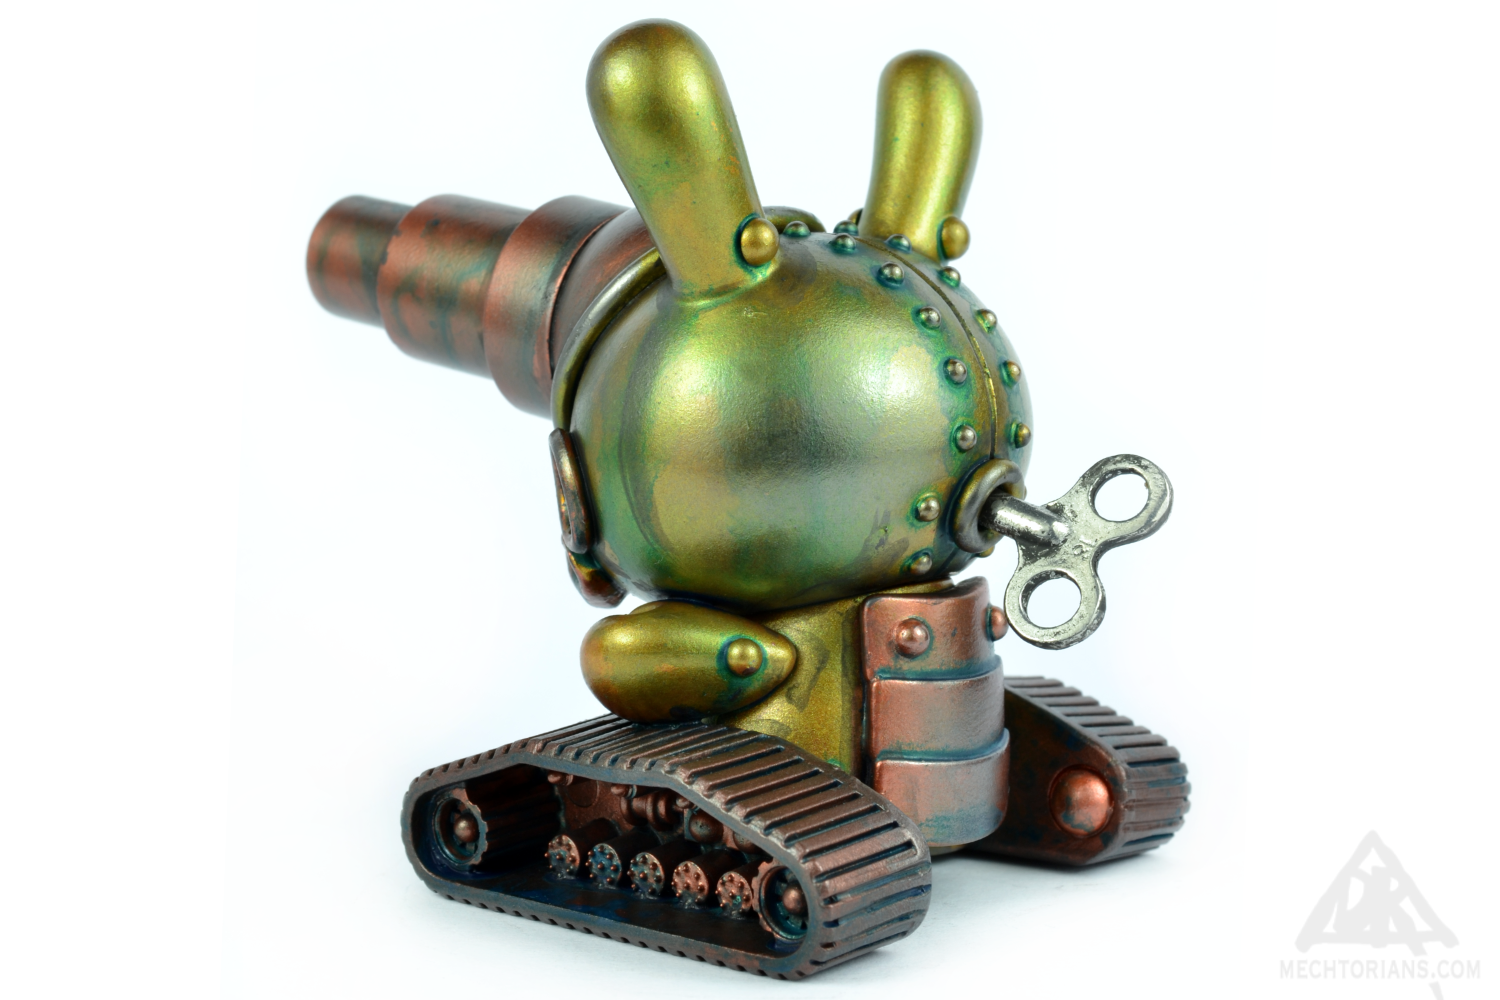 Sherman Smoothbore. A Tank shaped Mechtorian Customised 3" Dunny by Doktor A. Bruce Whistlecraft.